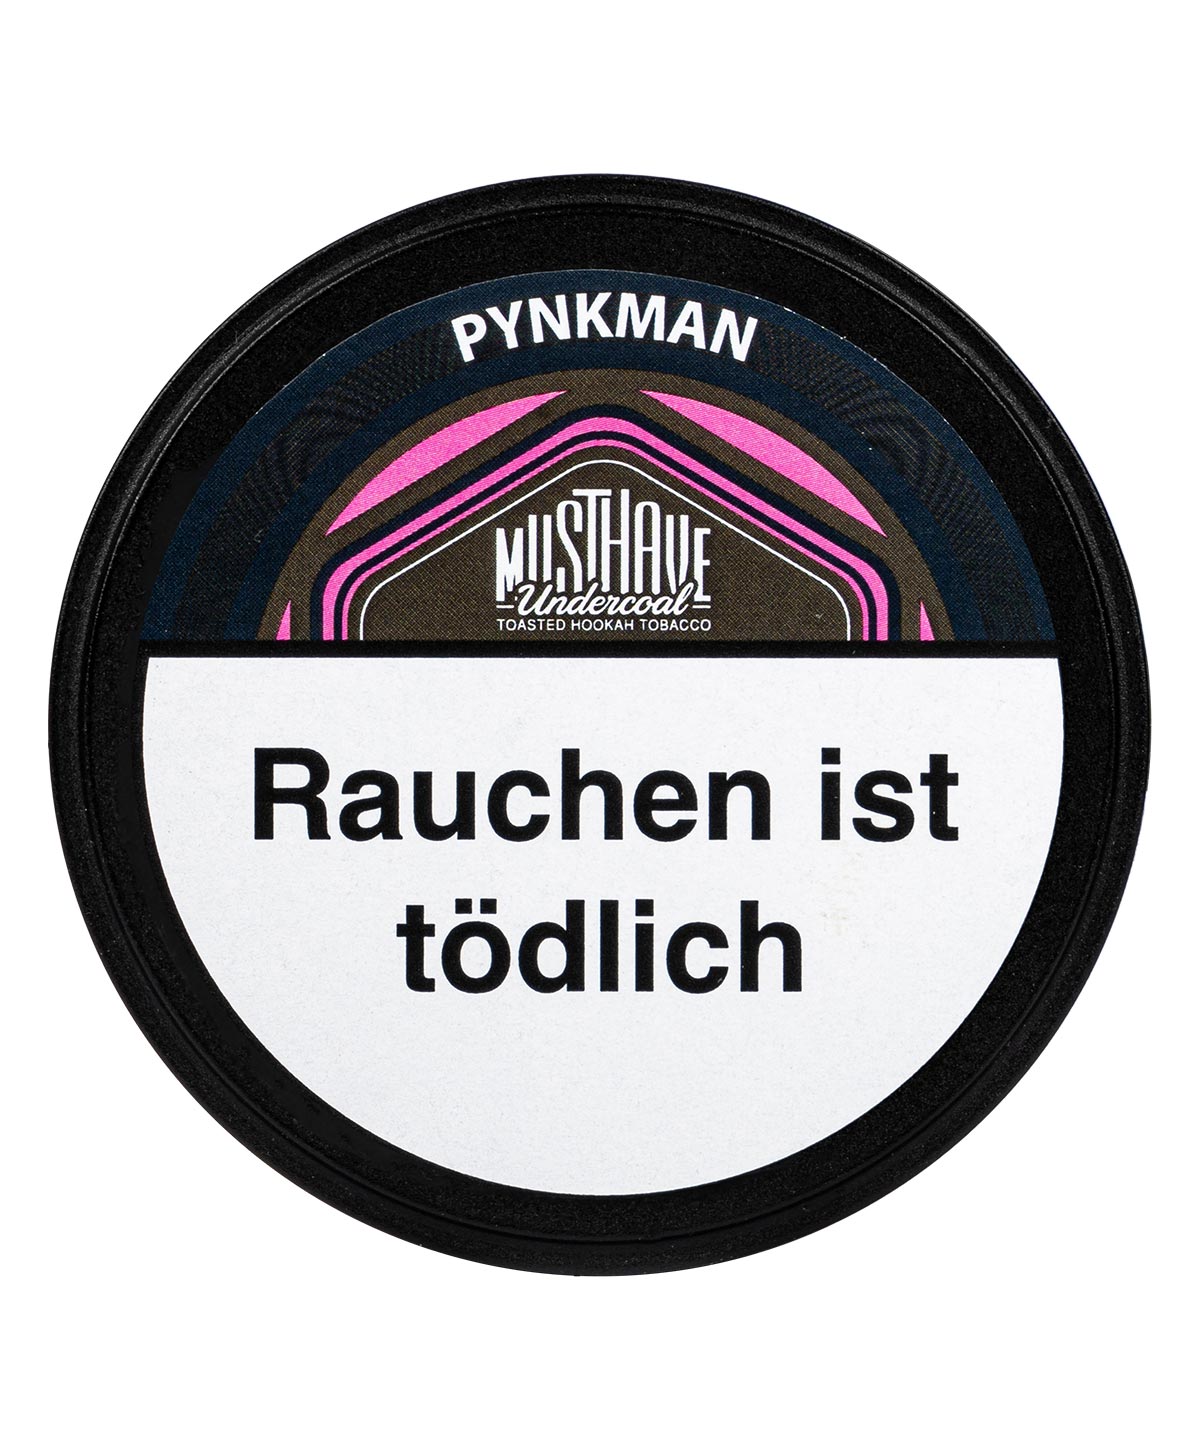 Musthave Pynkman 25g